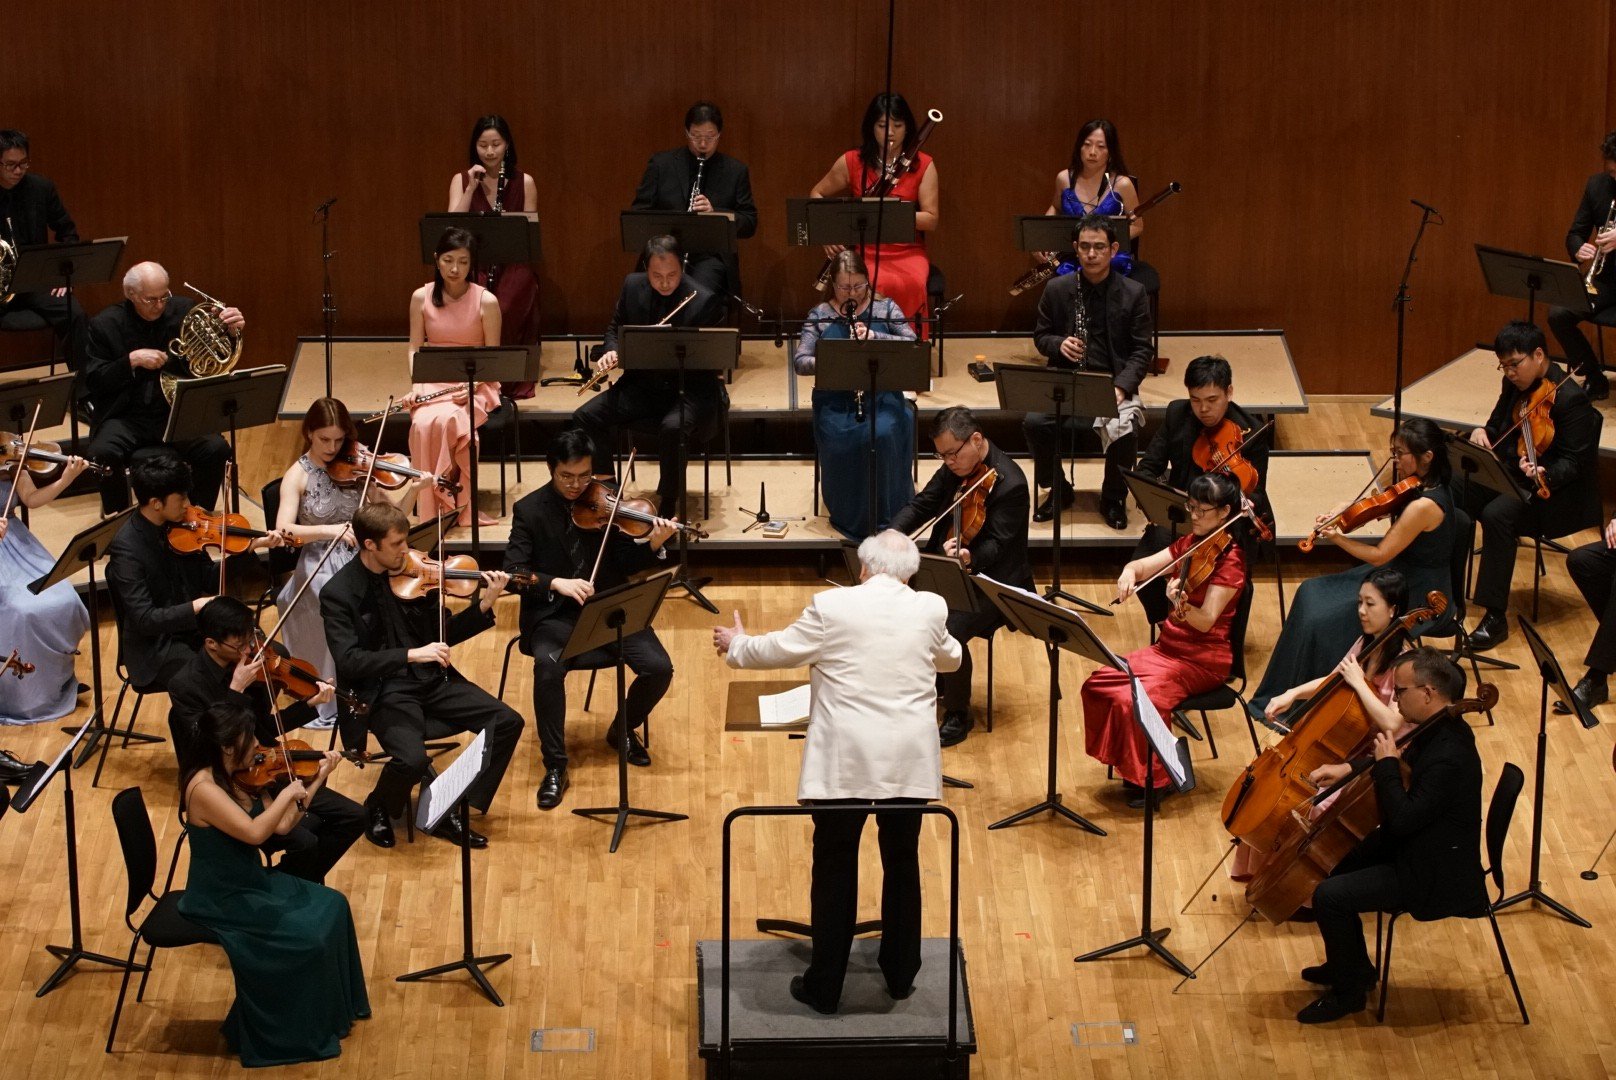 Conductor and pianist Philippe Entremont (on the podium) performing with the City Chamber Orchestra of Hong Kong. Photo: City Chamber Orchestra of Hong Kong